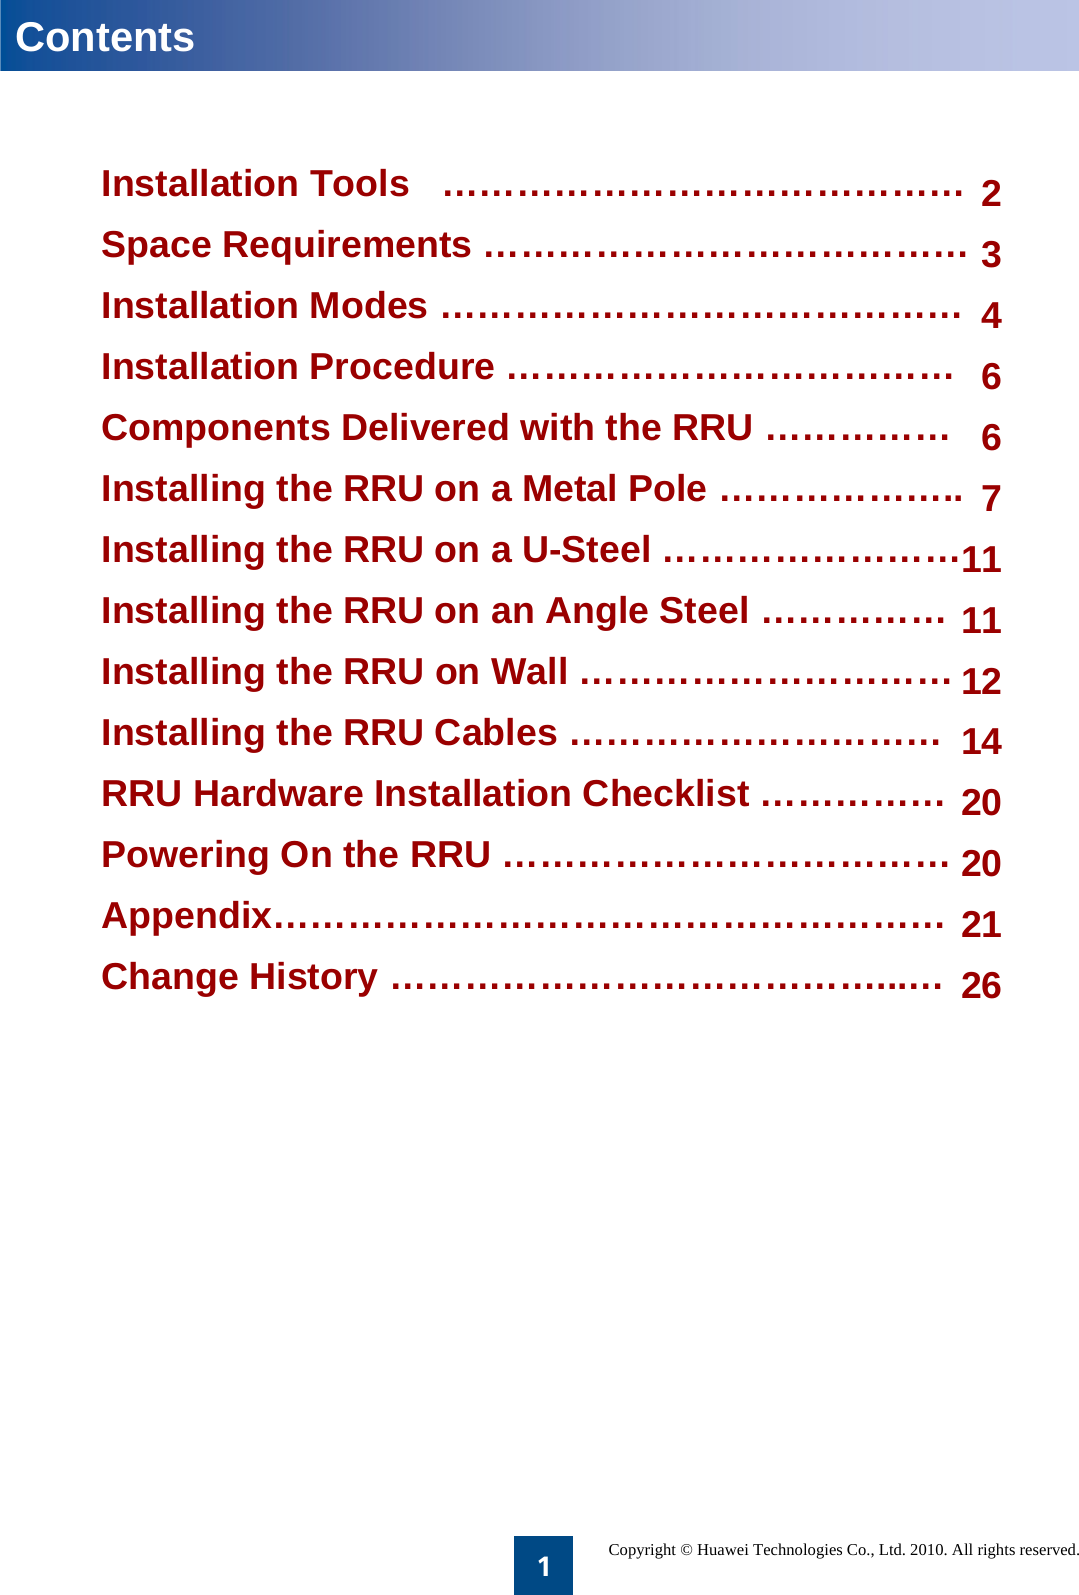 1Installation Tools   ……………………………………Space Requirements …………………………………Installation Modes ……………………………………Installation Procedure ………………………………Components Delivered with the RRU ……………Installing the RRU on a Metal Pole ………………..Installing the RRU on a U-Steel ……………………Installing the RRU on an Angle Steel ……………Installing the RRU on Wall …………………………Installing the RRU Cables …………………………RRU Hardware Installation Checklist ……………Powering On the RRU ………………………………Appendix………………………………………………Change History …………………………………...…ContentsCopyright © Huawei Technologies Co., Ltd. 2010. All rights reserved.2346671111121420202126